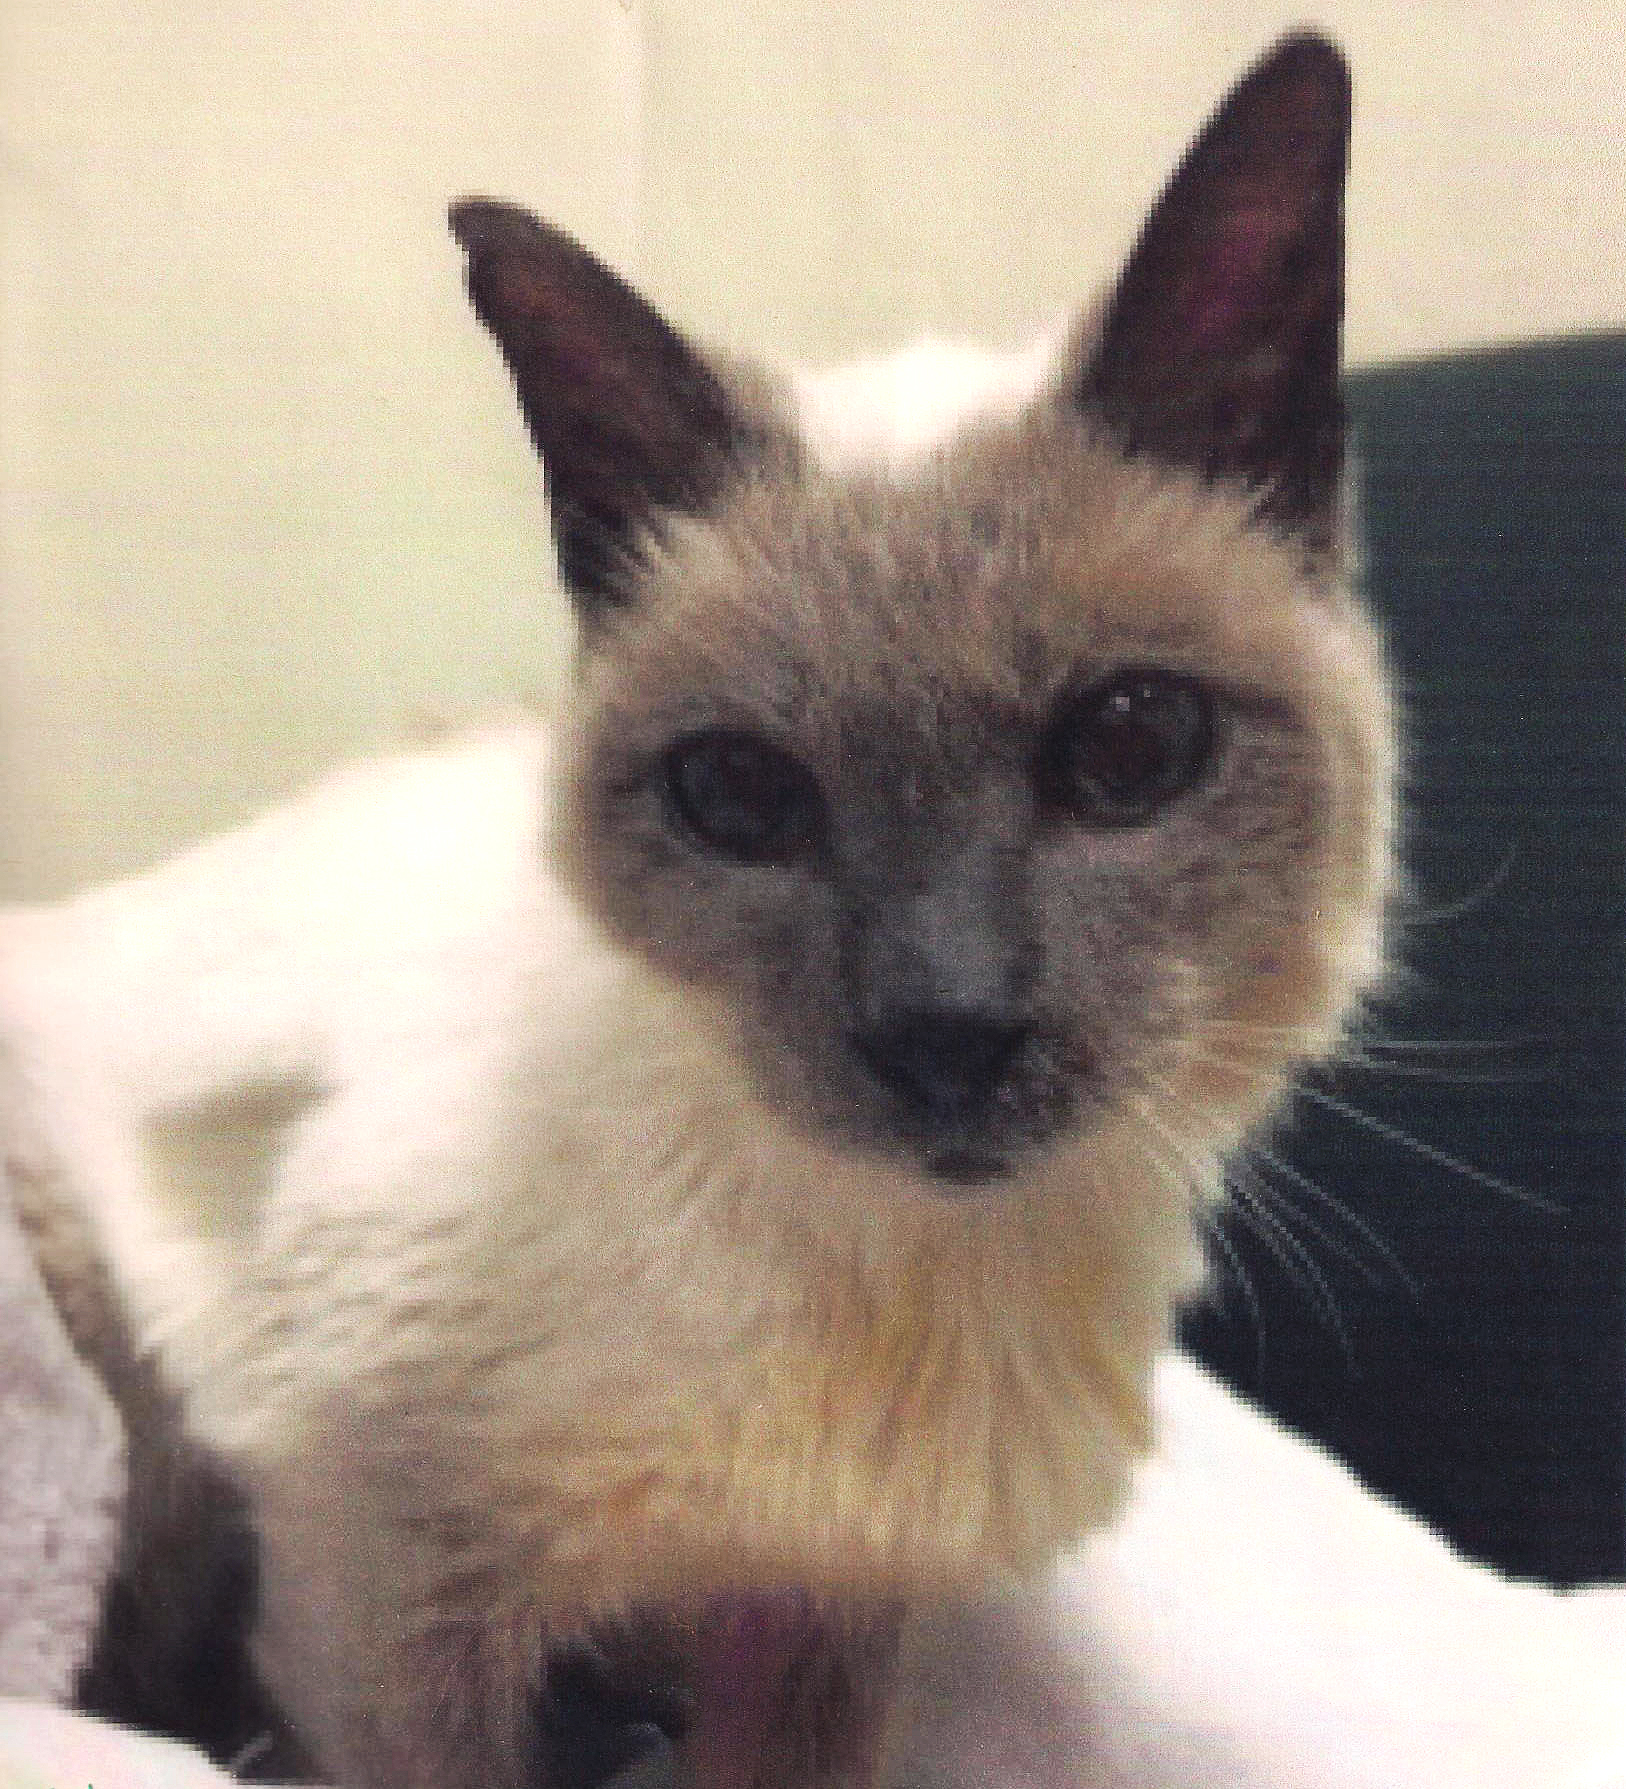 30-year-old Siamese is world's oldest living cat | The Japan Times